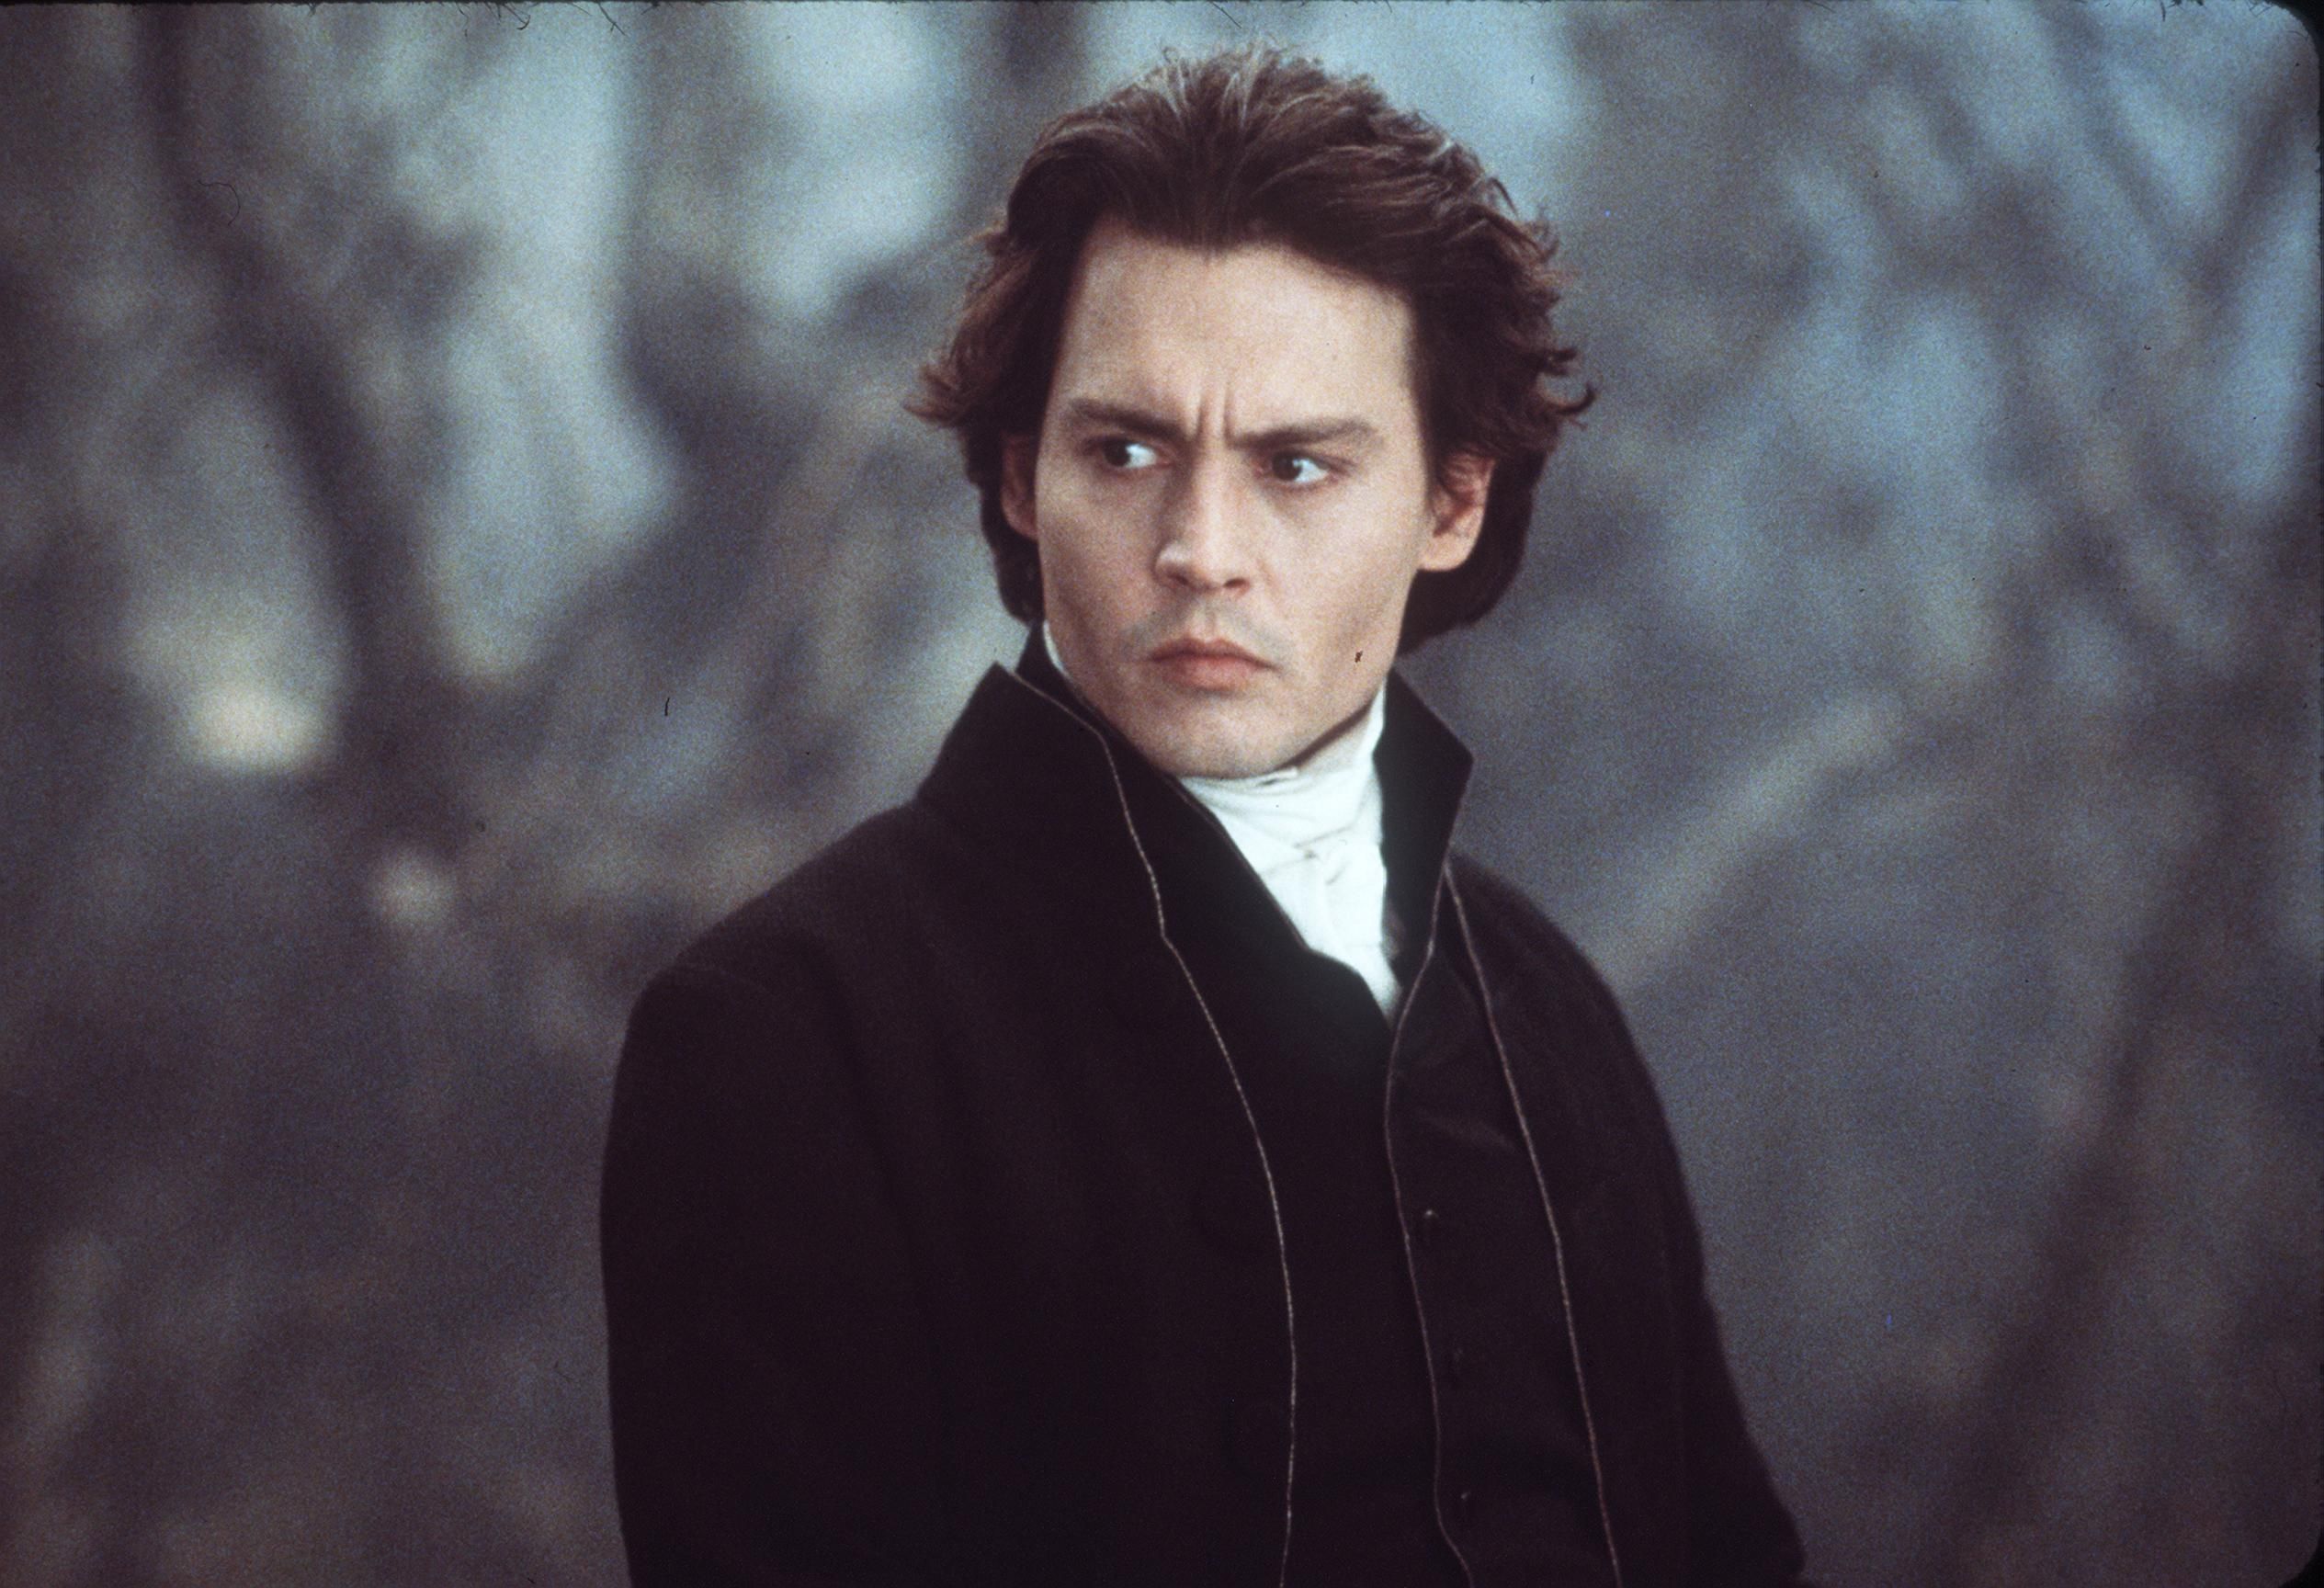 Johnny Deep Stars In The Movie "Sleepy Hollow." | Source: Getty Images